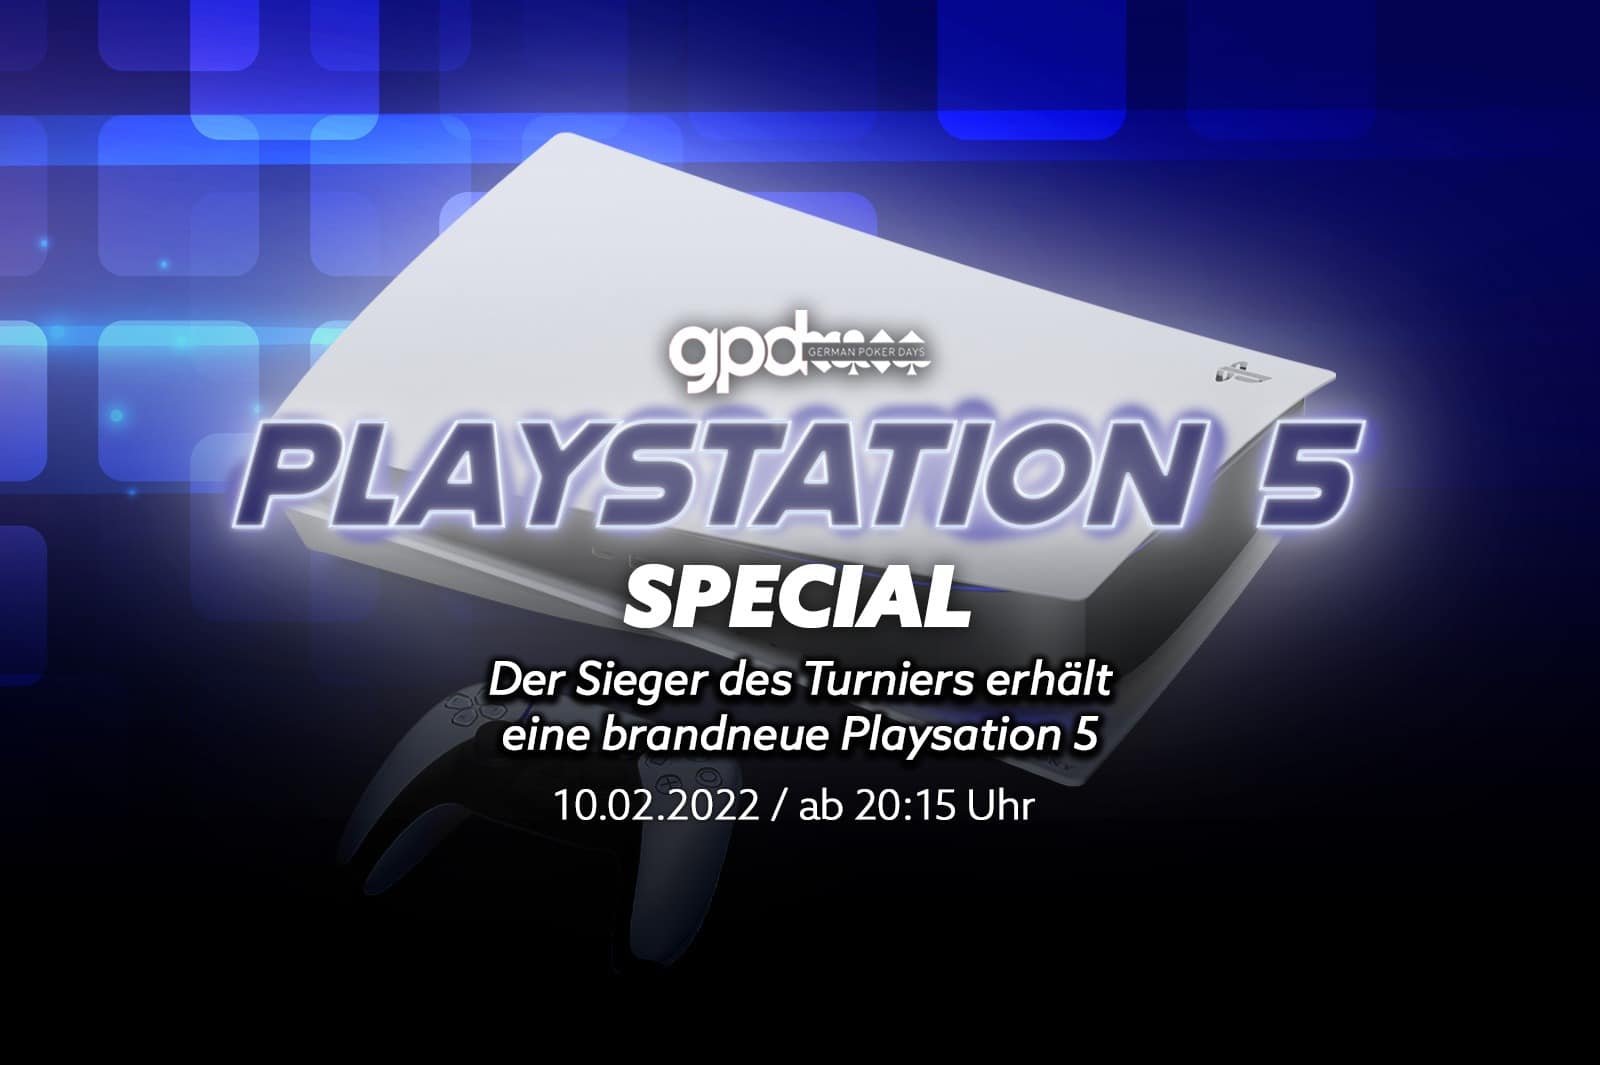 PlayStation 5 Special by German Poker Days